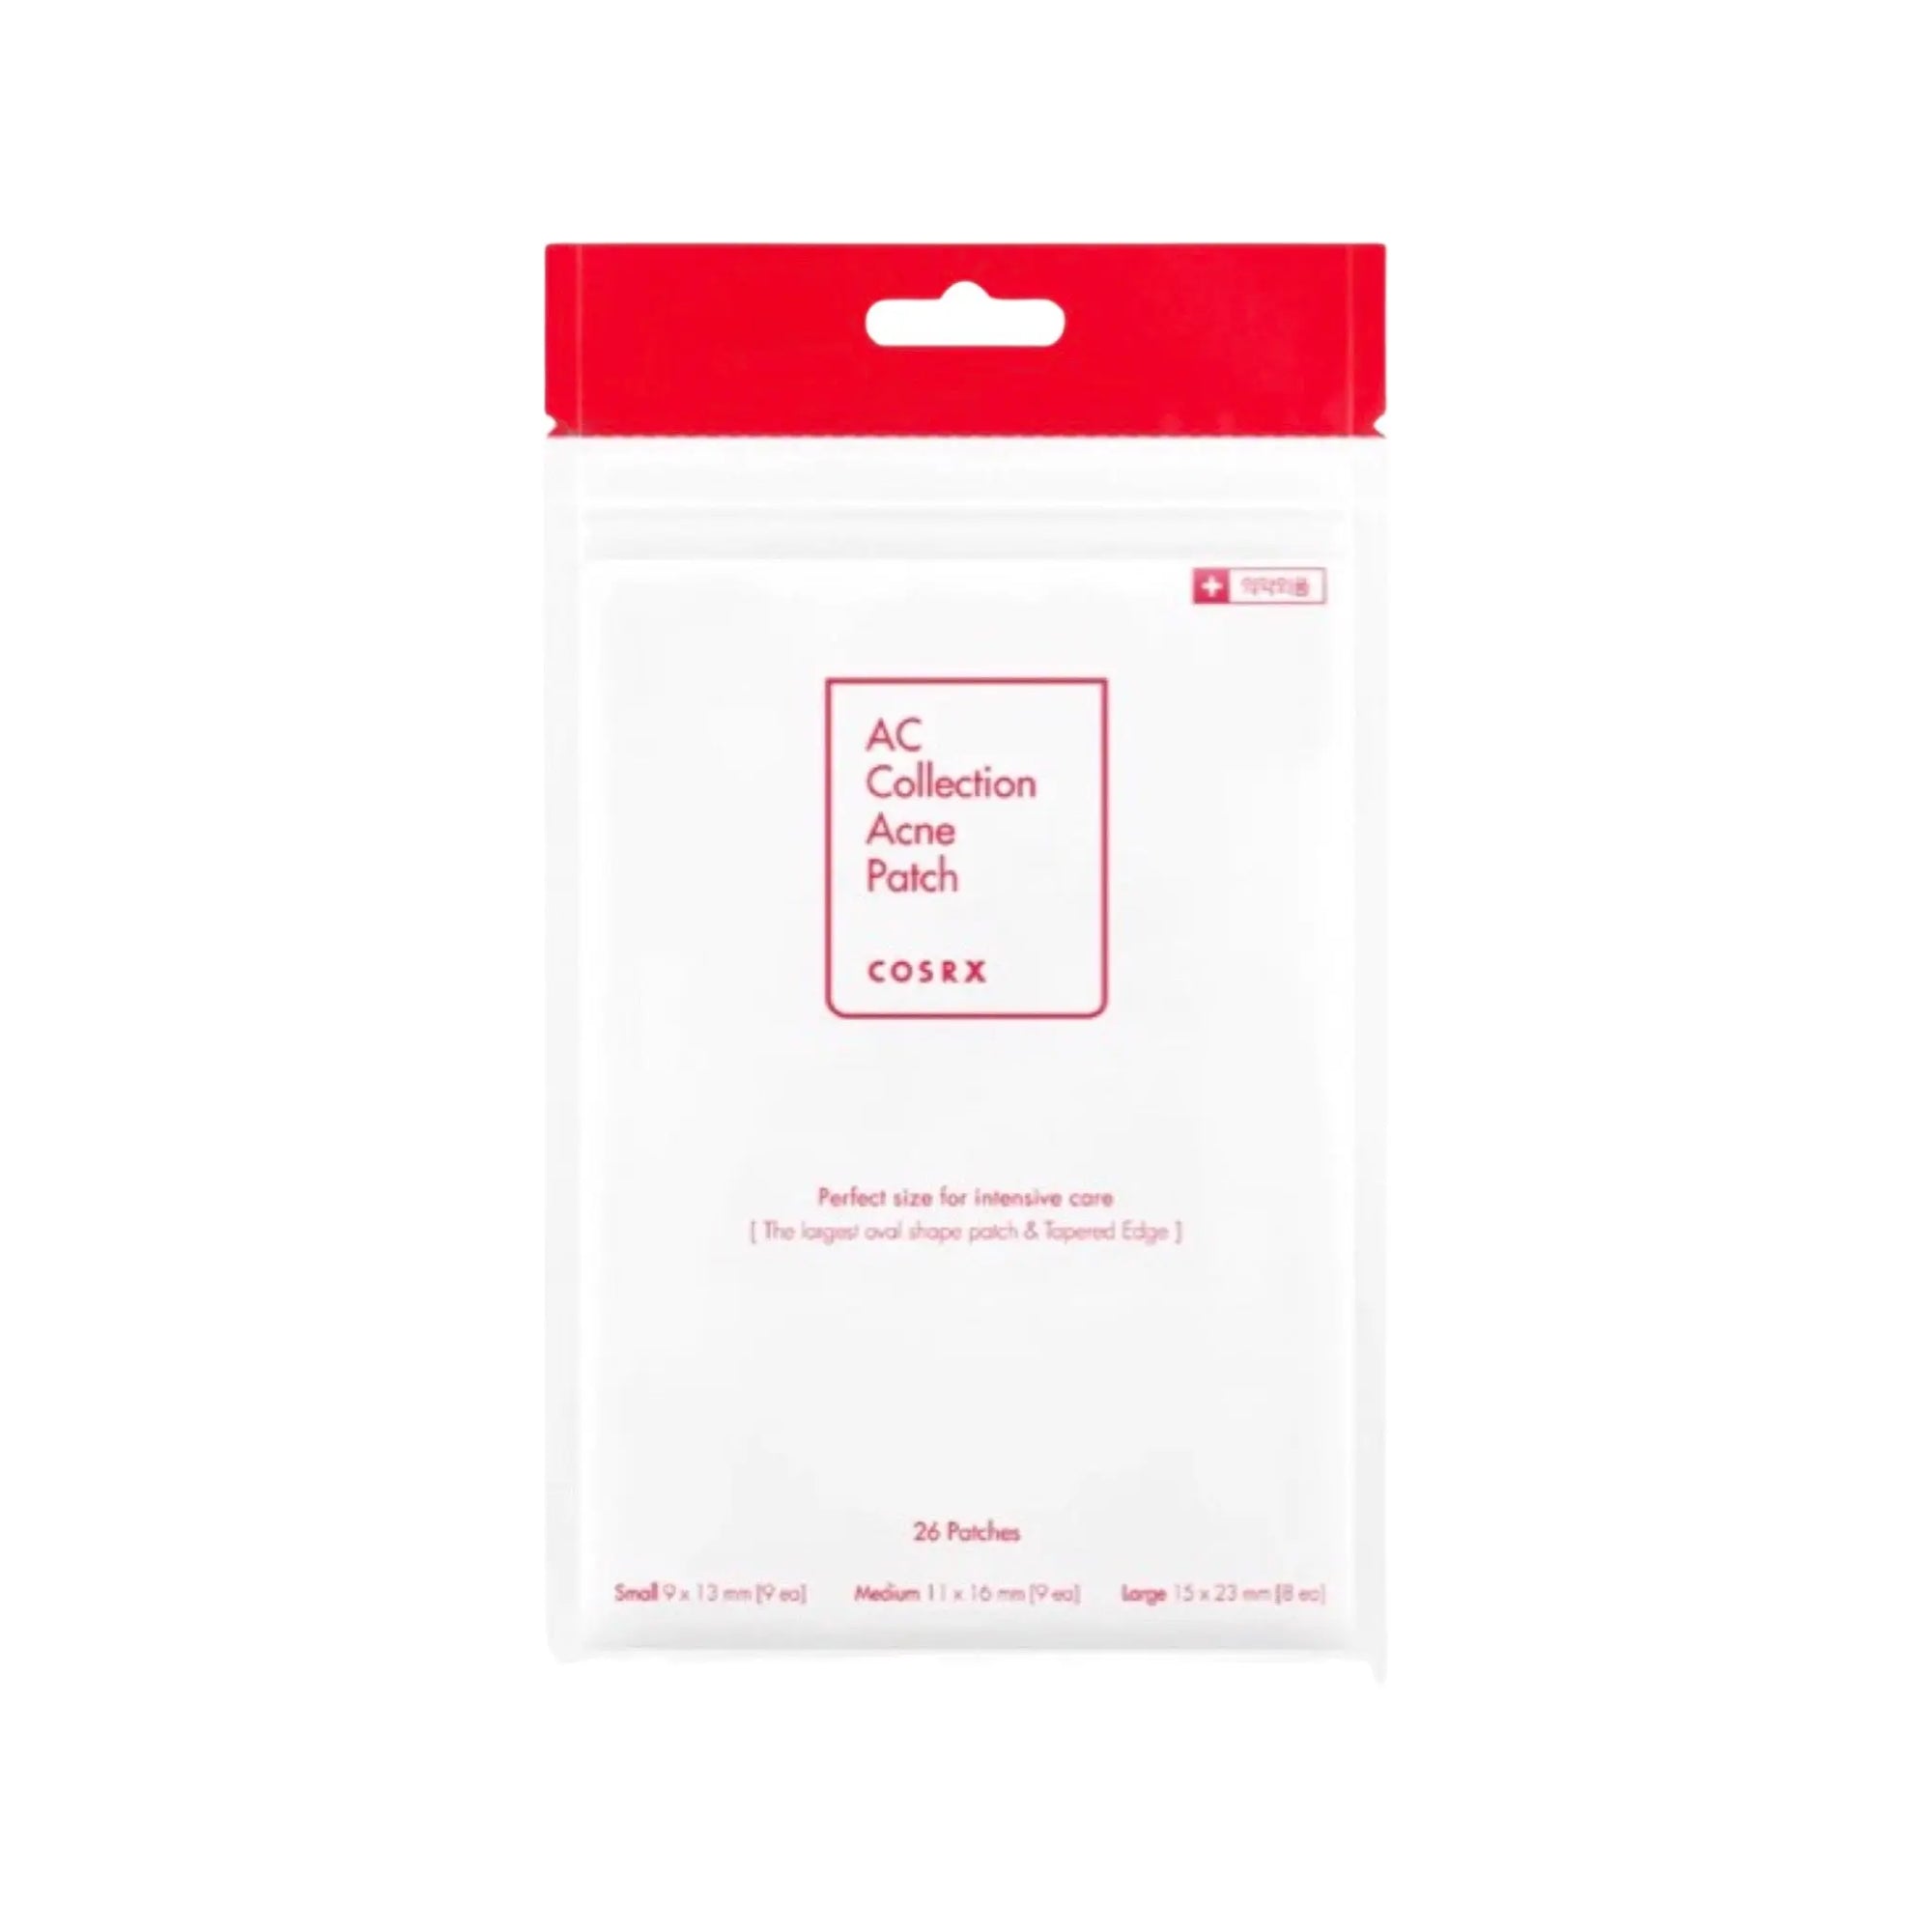 COSRX - AC Collection Acne Patch (26 patches) COSRX